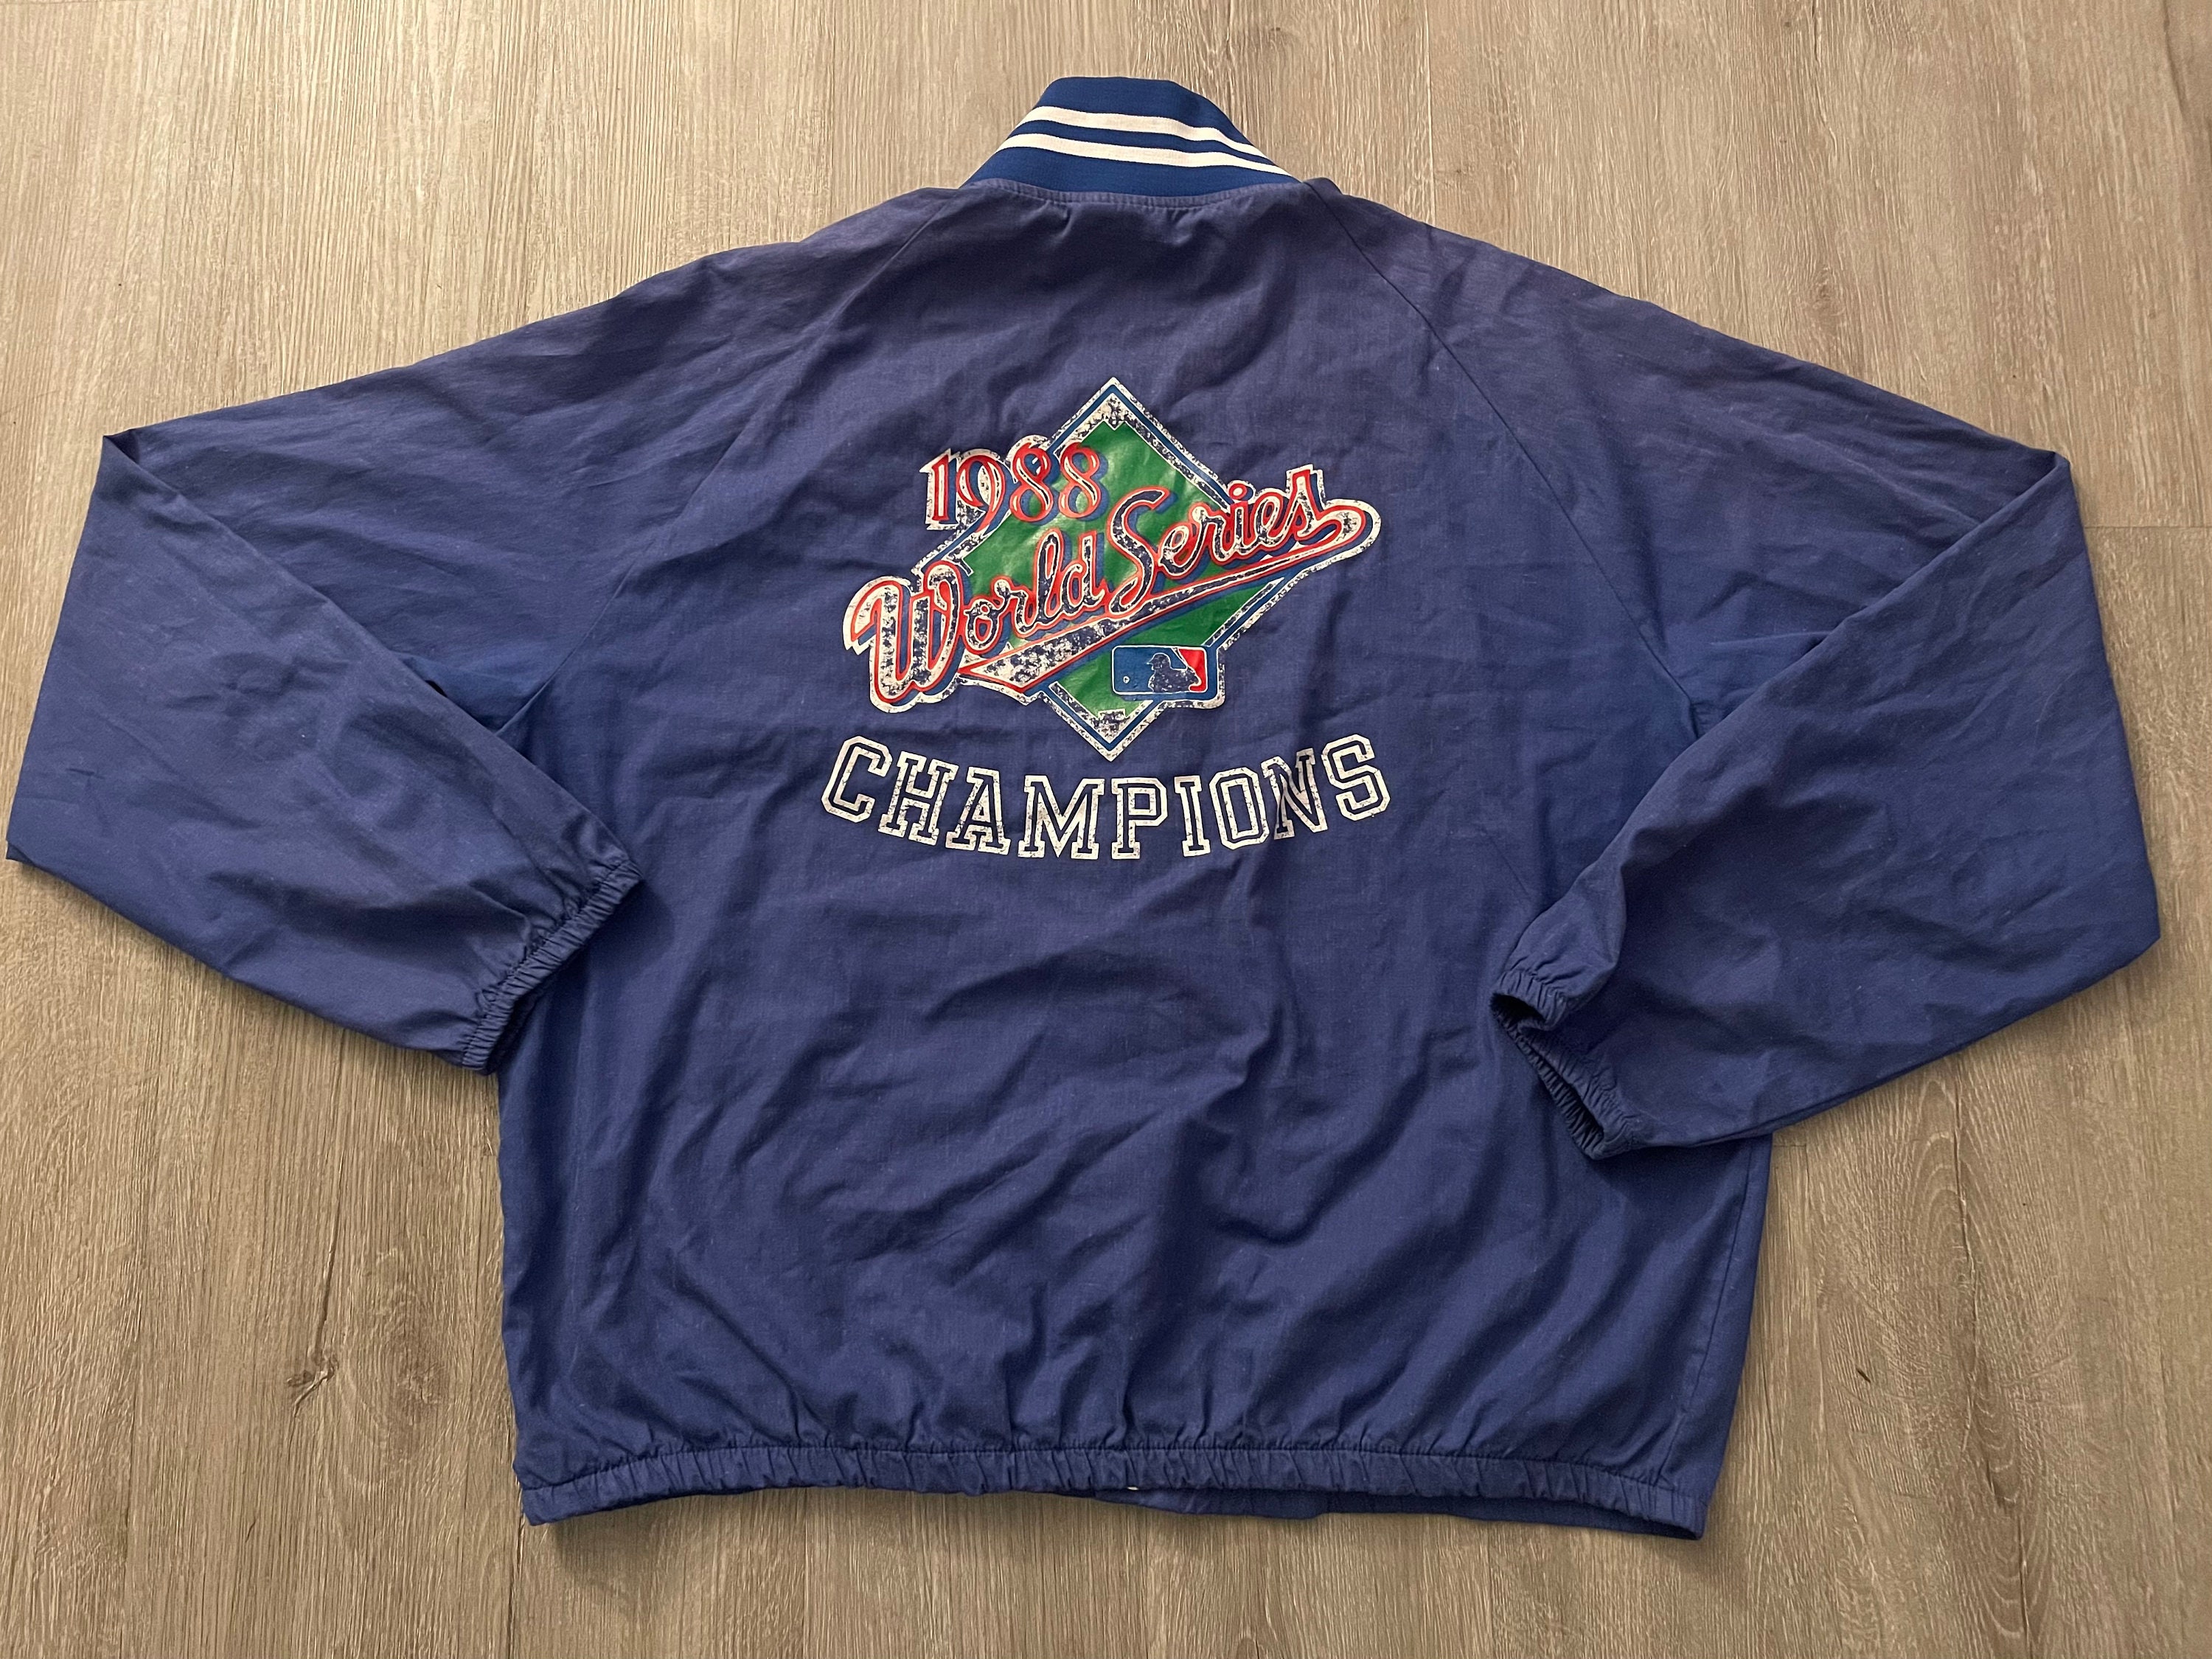 LegacyVintage99 Vintage Los Angeles Dodgers 1988 World Series Champions MLB Screen Stars Made USA New with Tags 1980s 80s California Baseball Tee T Shirt